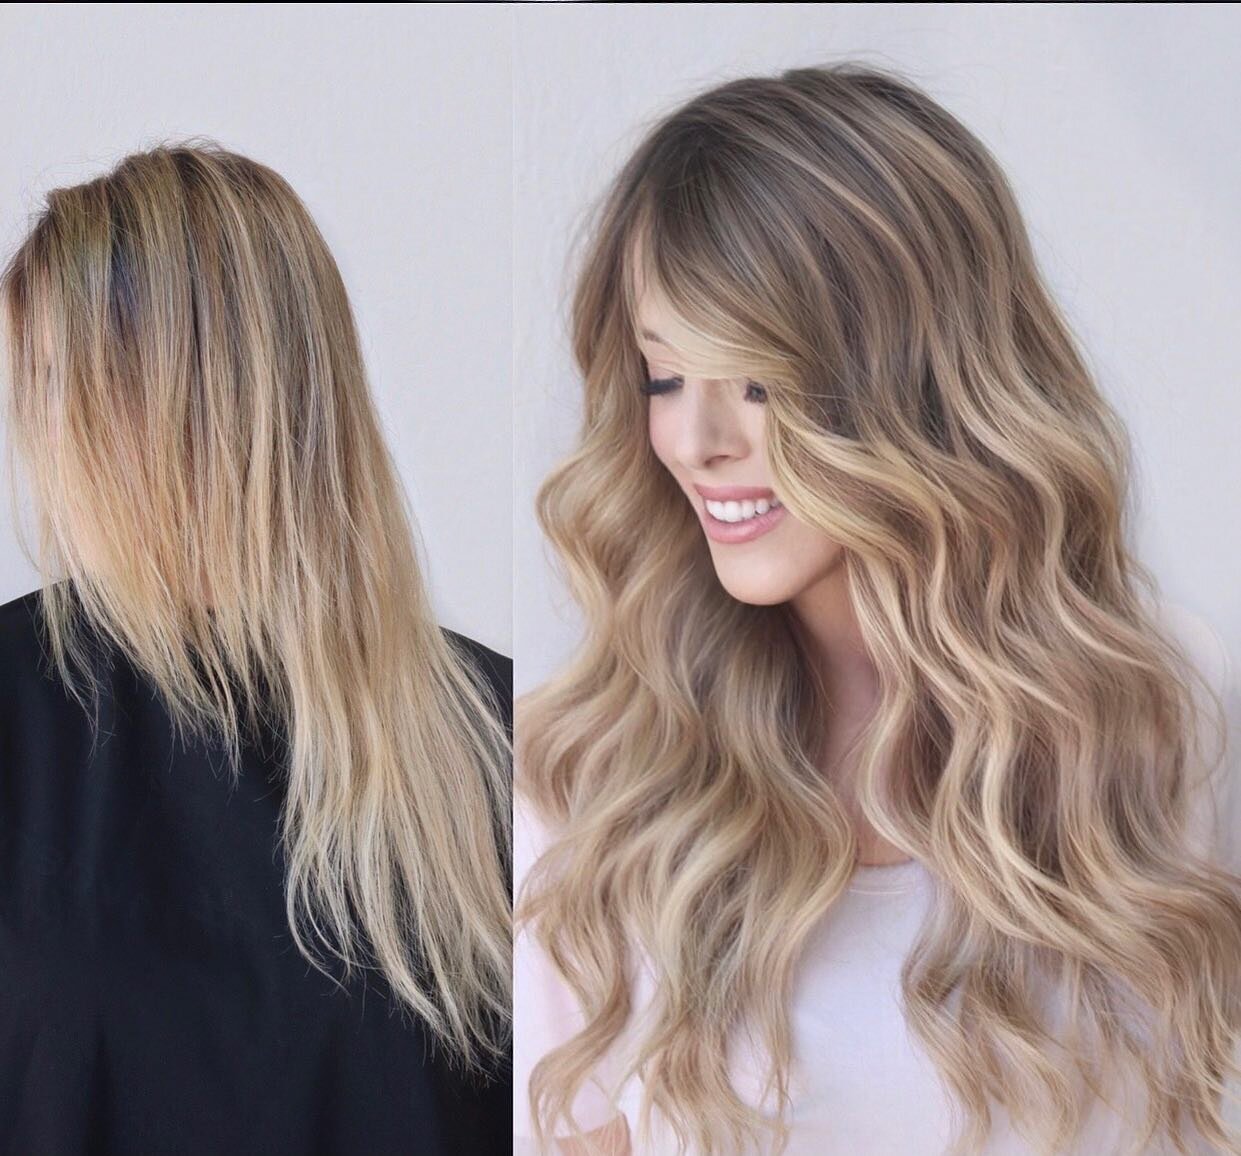 When you need to fill in that side gap! 😳
.
It&rsquo;s pretty common actually, and you might even be thinking - yeah, that&rsquo;s me! 🙋🏼&zwj;♀️
.
NBR Extensions connect the short to long and give a seamless blend &amp; add max volume! 🤩
.
It lit